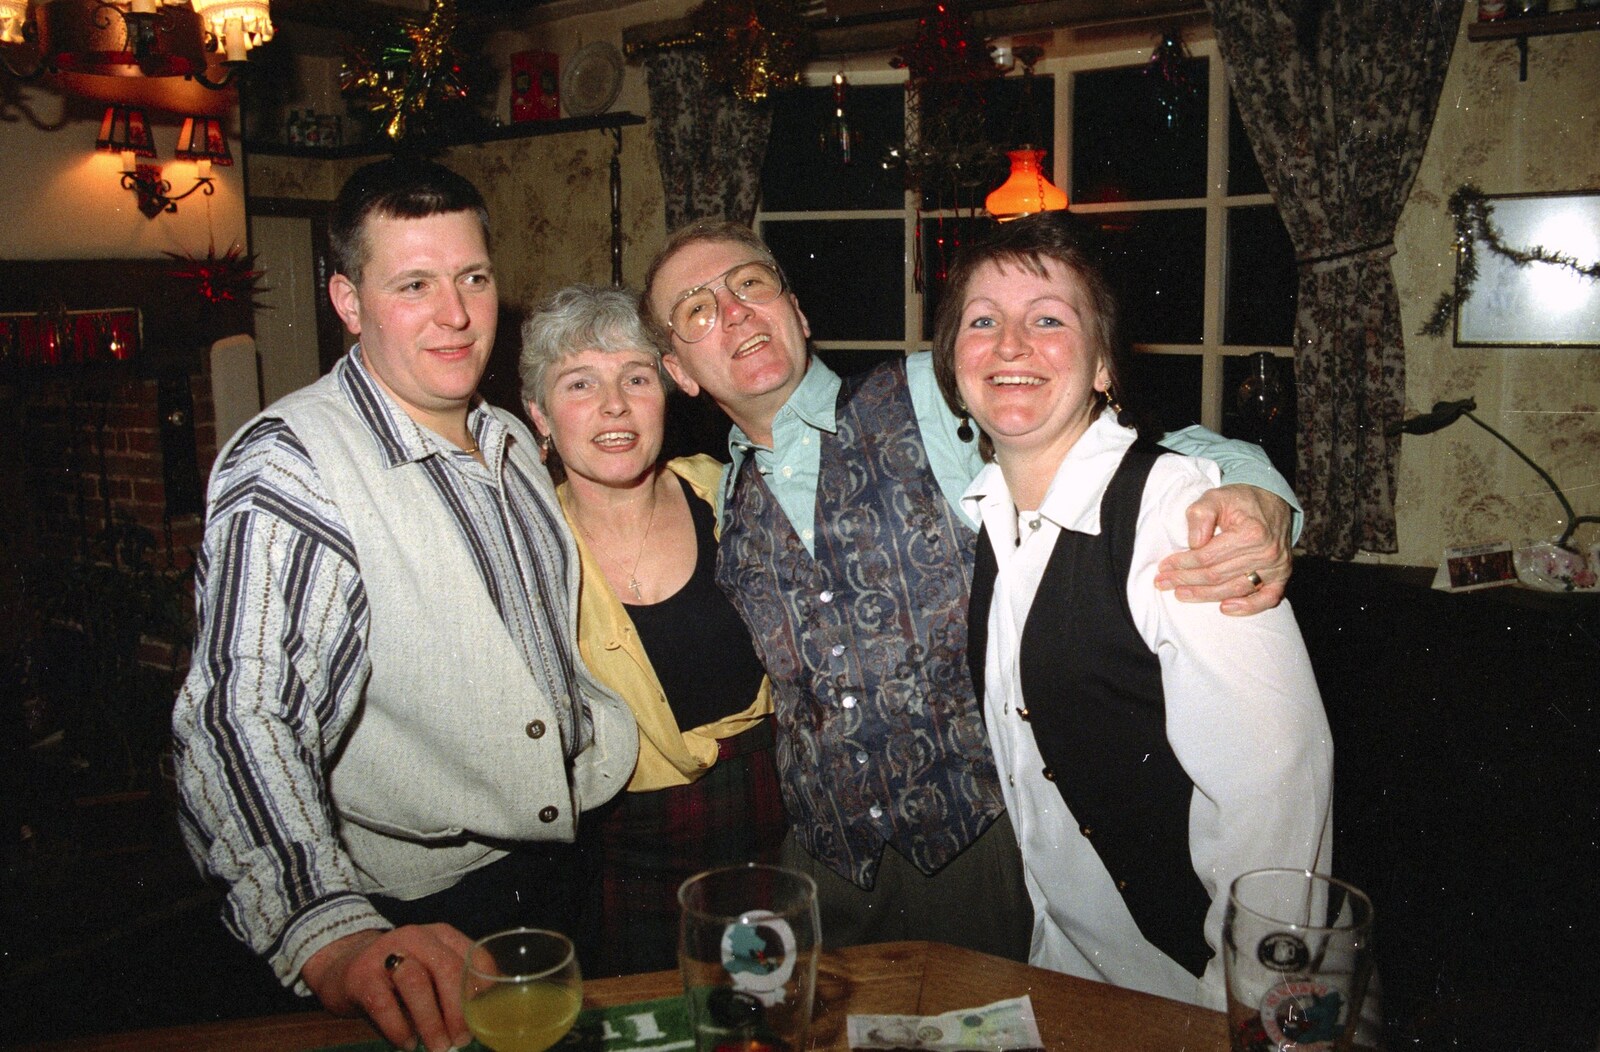 Barry, Spammy, John Willy and Davina from New Year's Eve at the Swan Inn, Brome, Suffolk - 31st December 1994